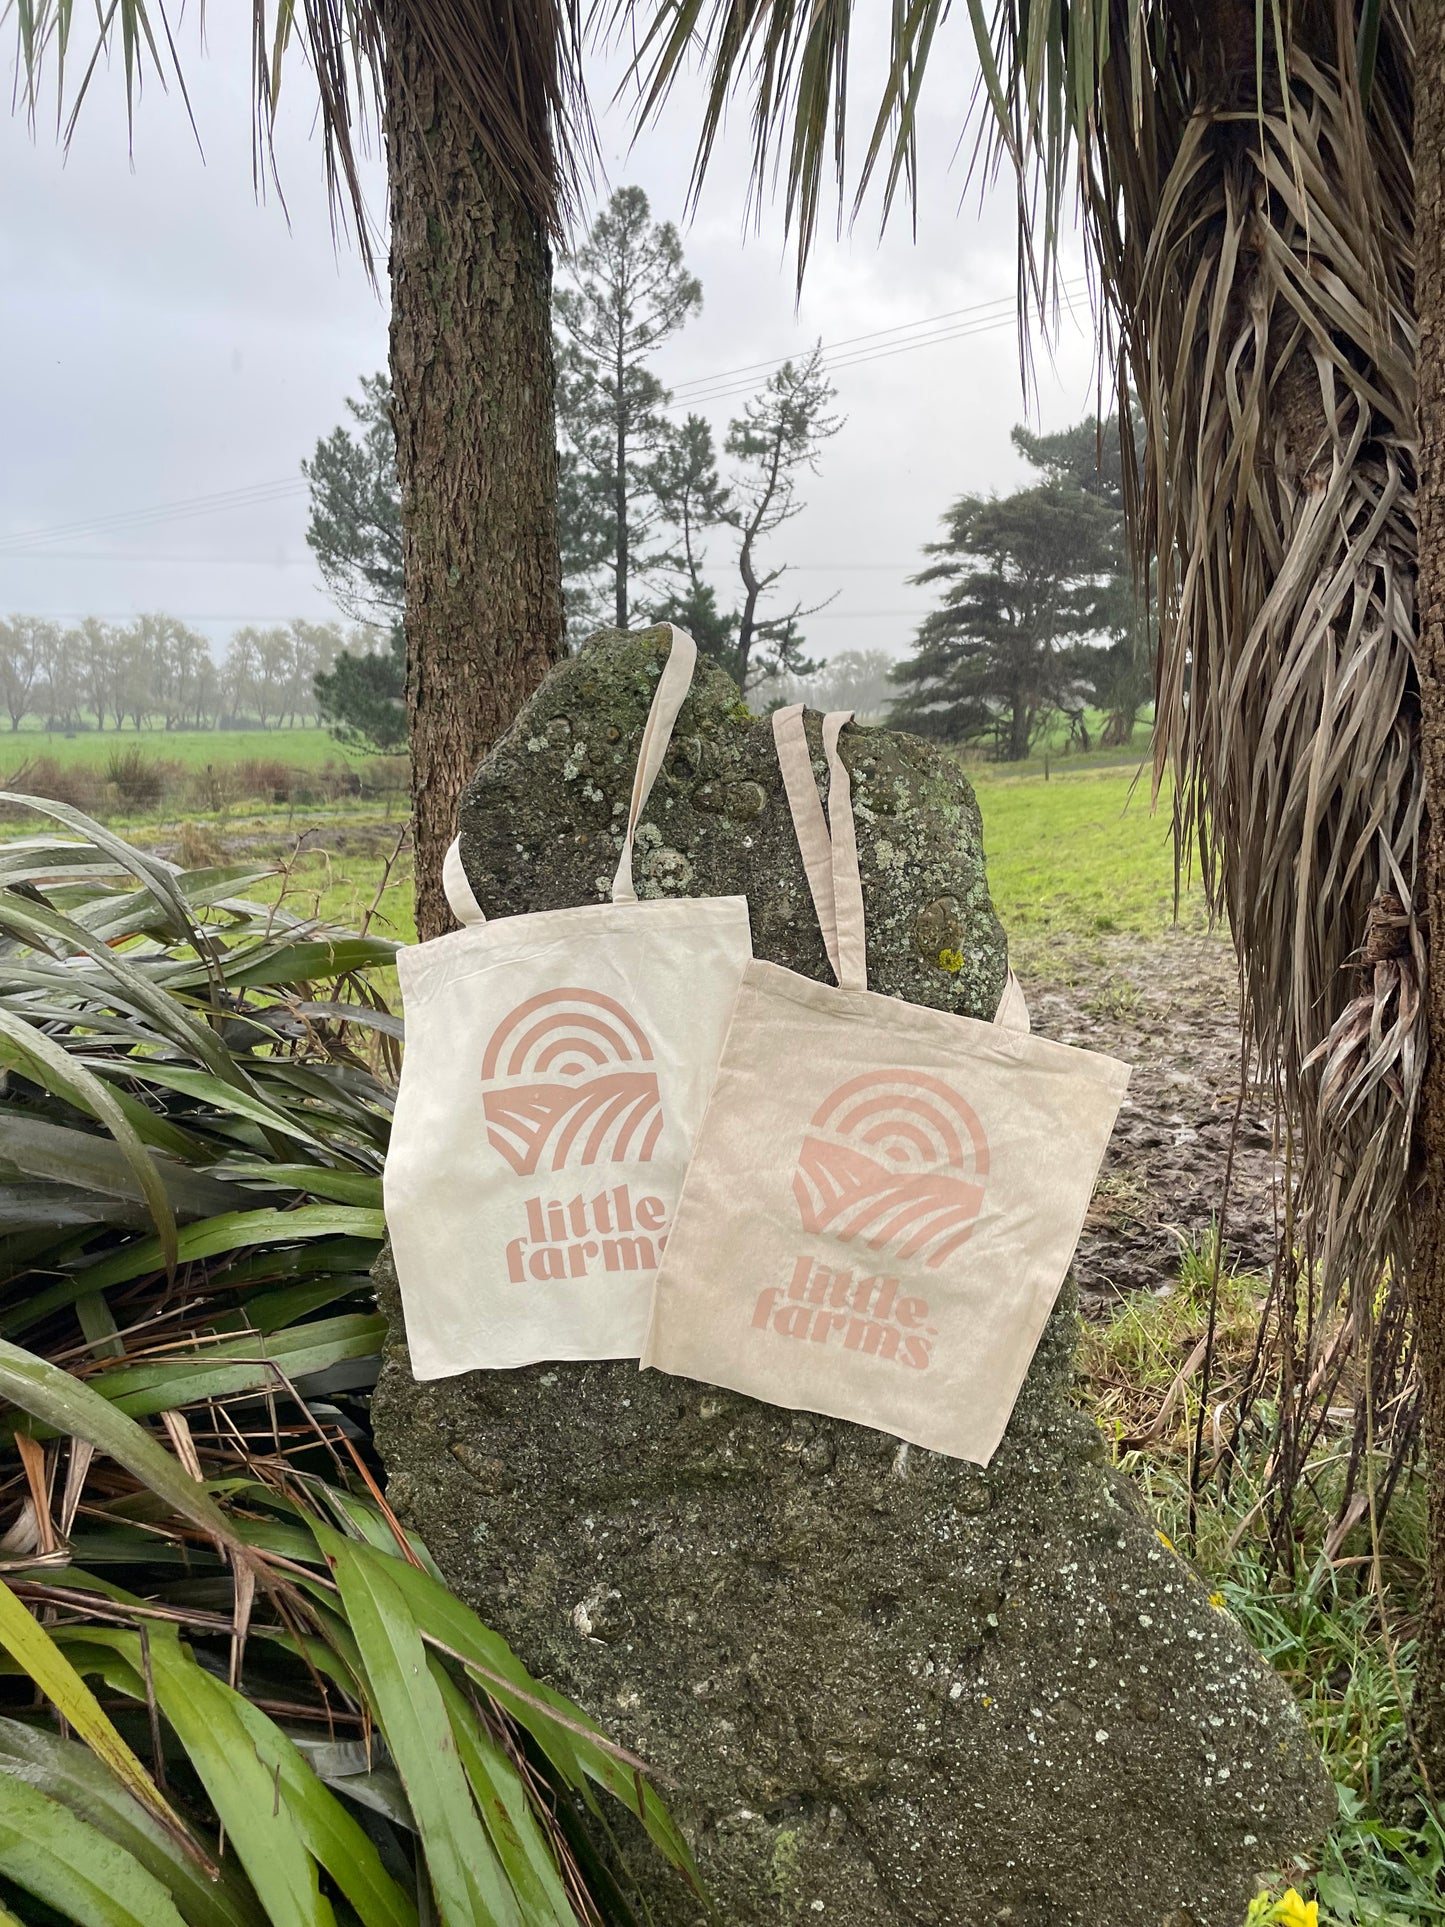 Little farms supporters tote